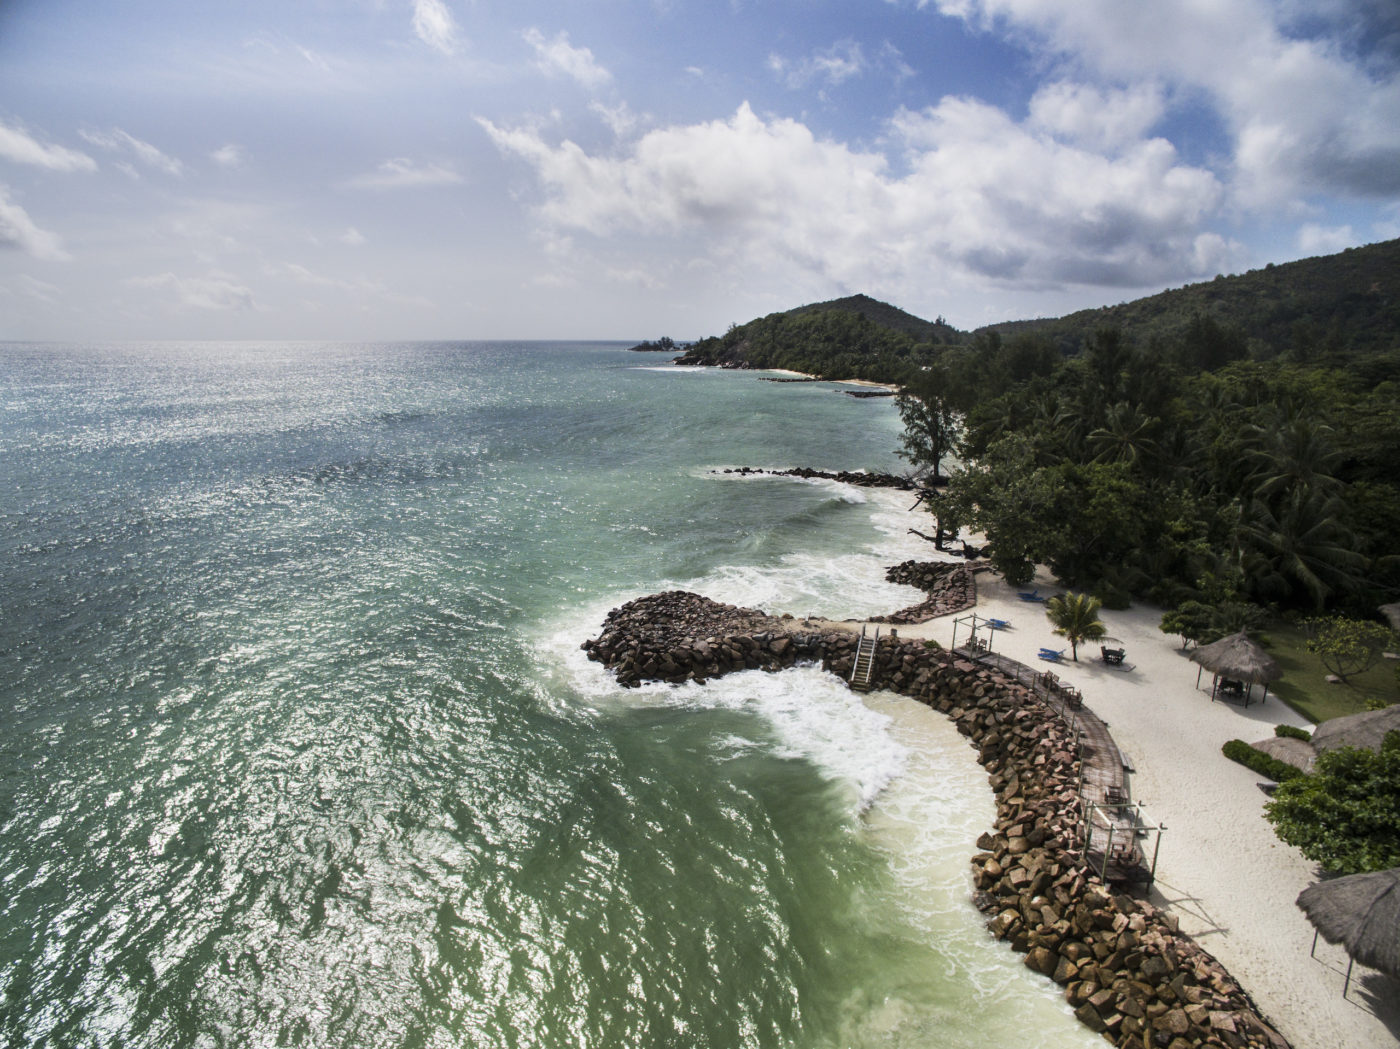 Coastal protection in the Seychelles